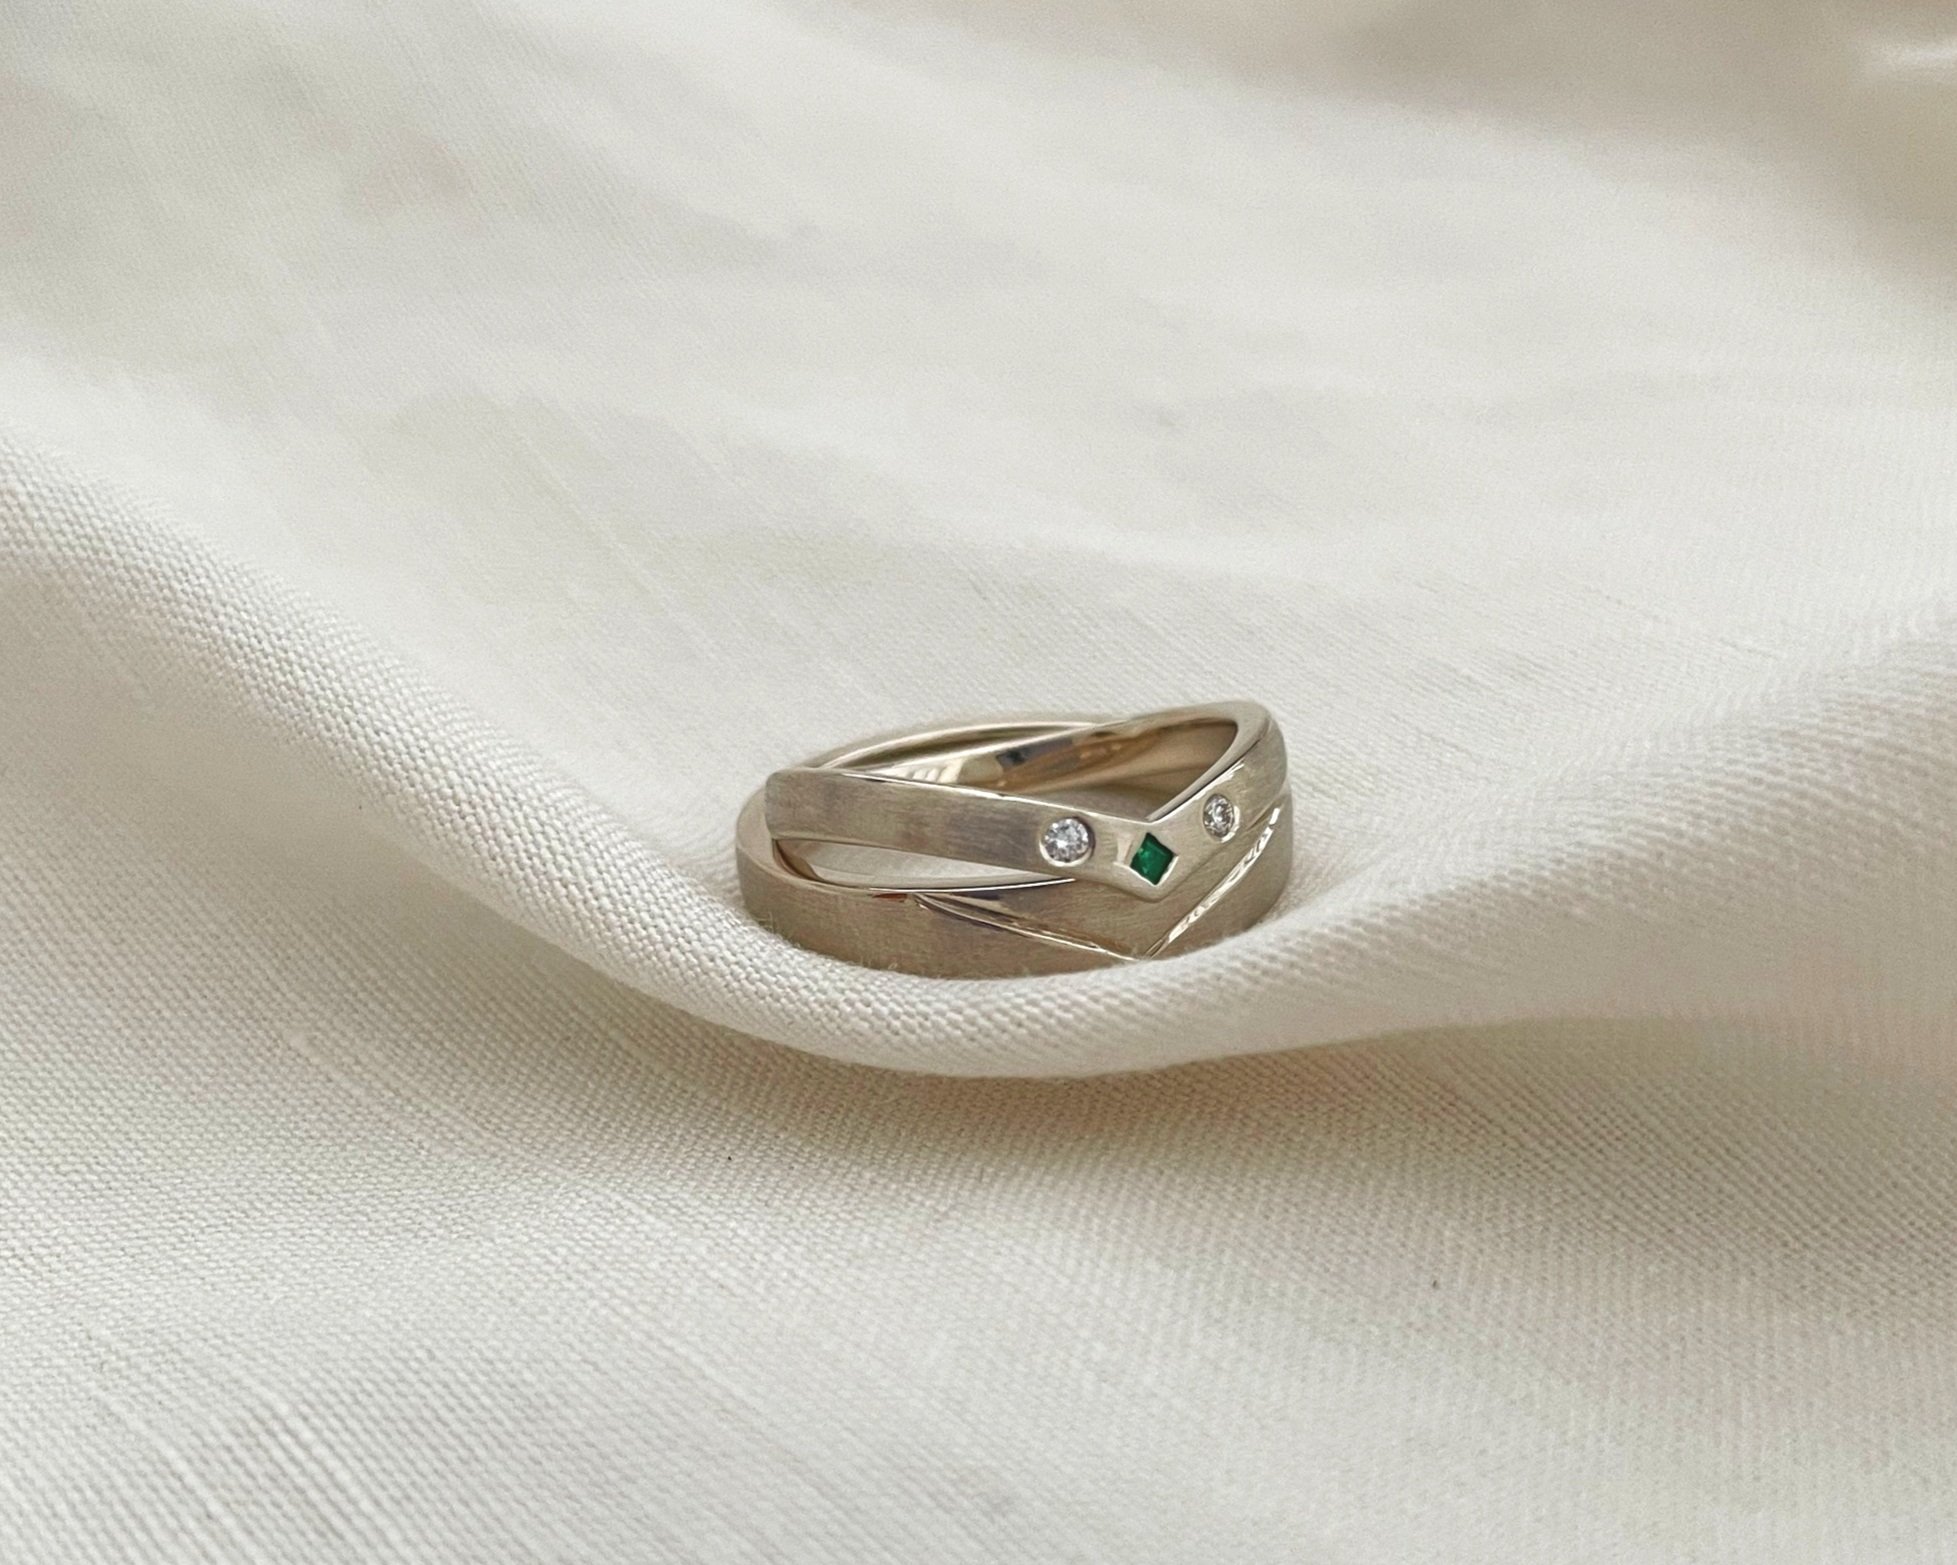  A pair of wedding bands that fit perfectly in a V shaped groove. The top band is set with Diamonds and an Emerald 